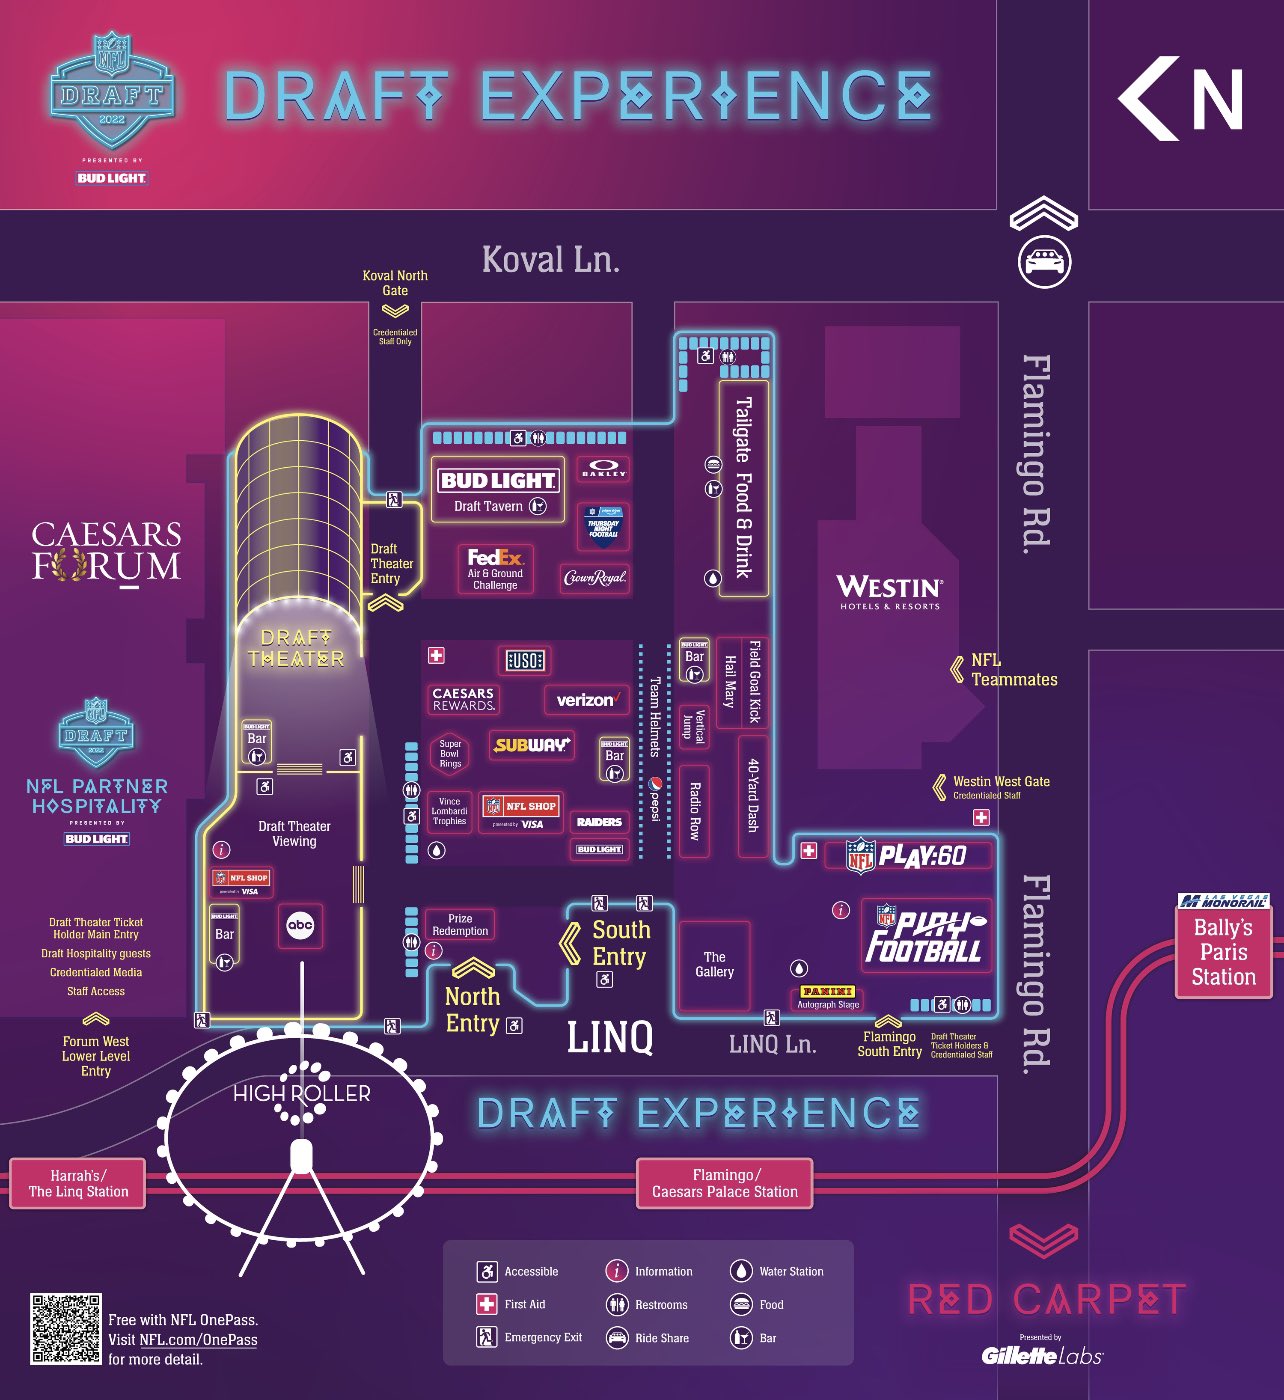 Mick Akers on X: 'Here's the NFL Experience map for next week's NFL Draft  in Las Vegas. #vegas #nfldraft  / X